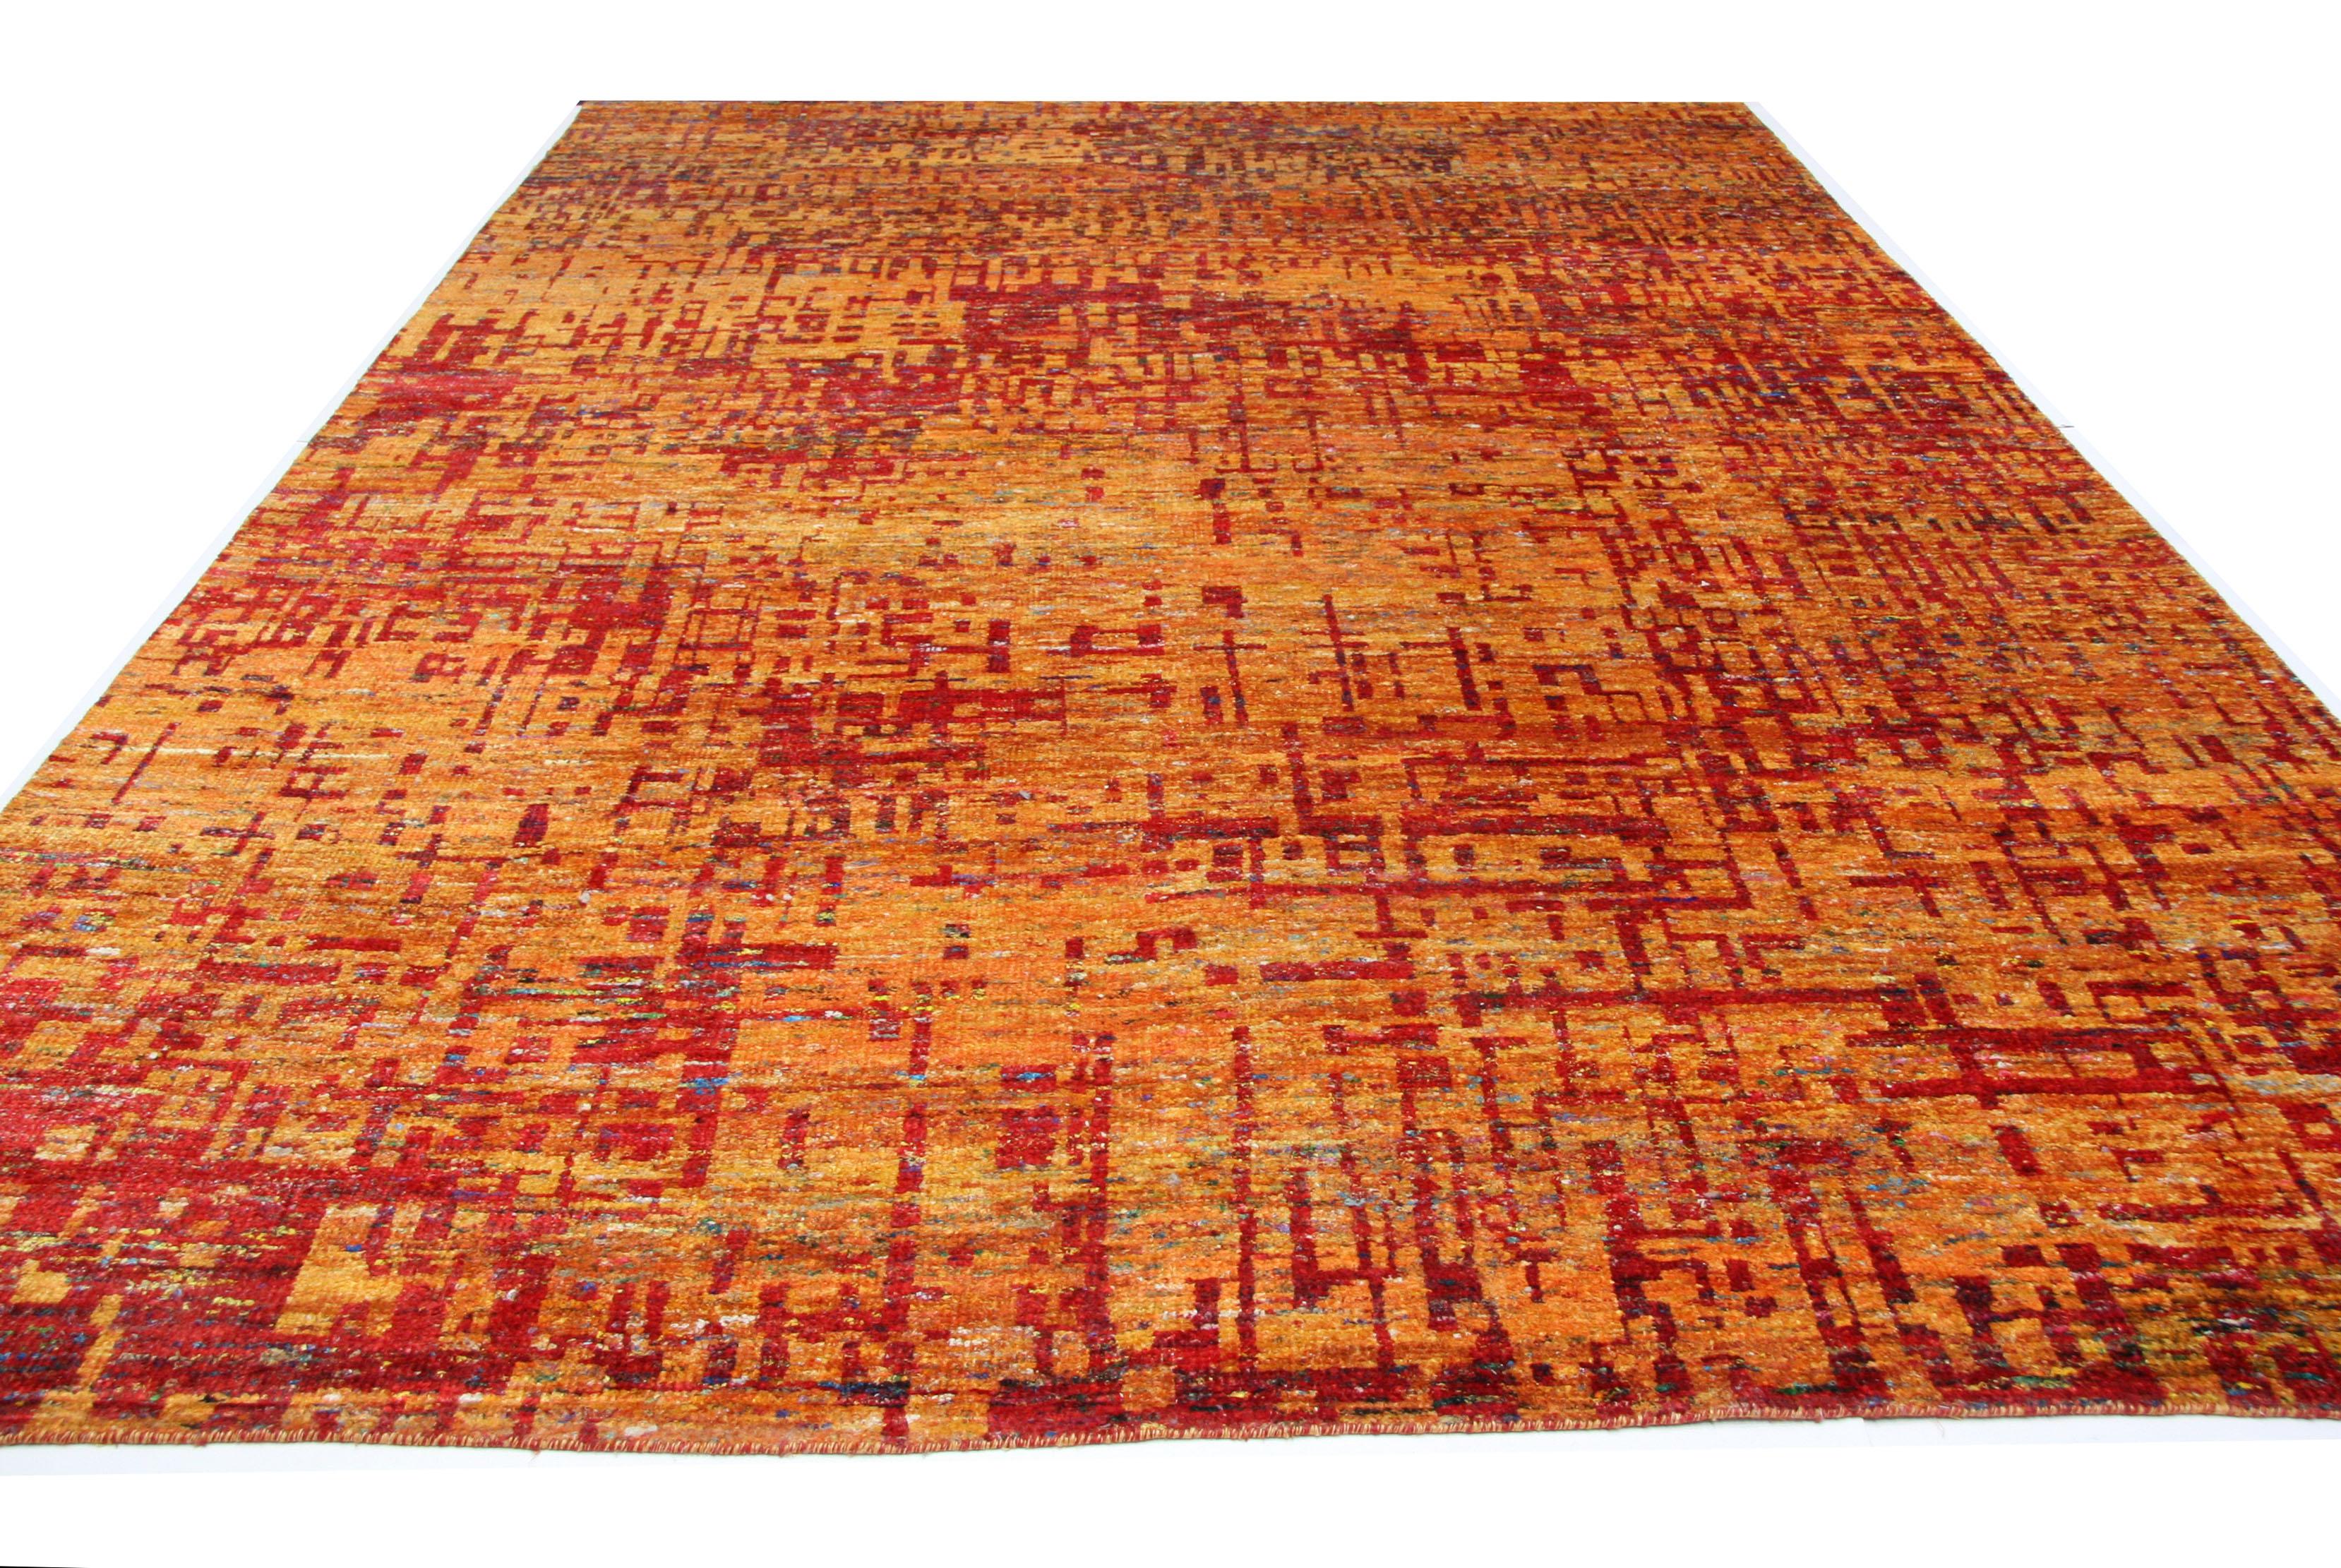 One of Aga John's most popular contemporary designs. Bold tones of orange, gold and red combine to bring a color pop to your space. Hand knotted viscose gives a silky smooth feel to the touch. Handmade in India.

Multiple sizes available. Also